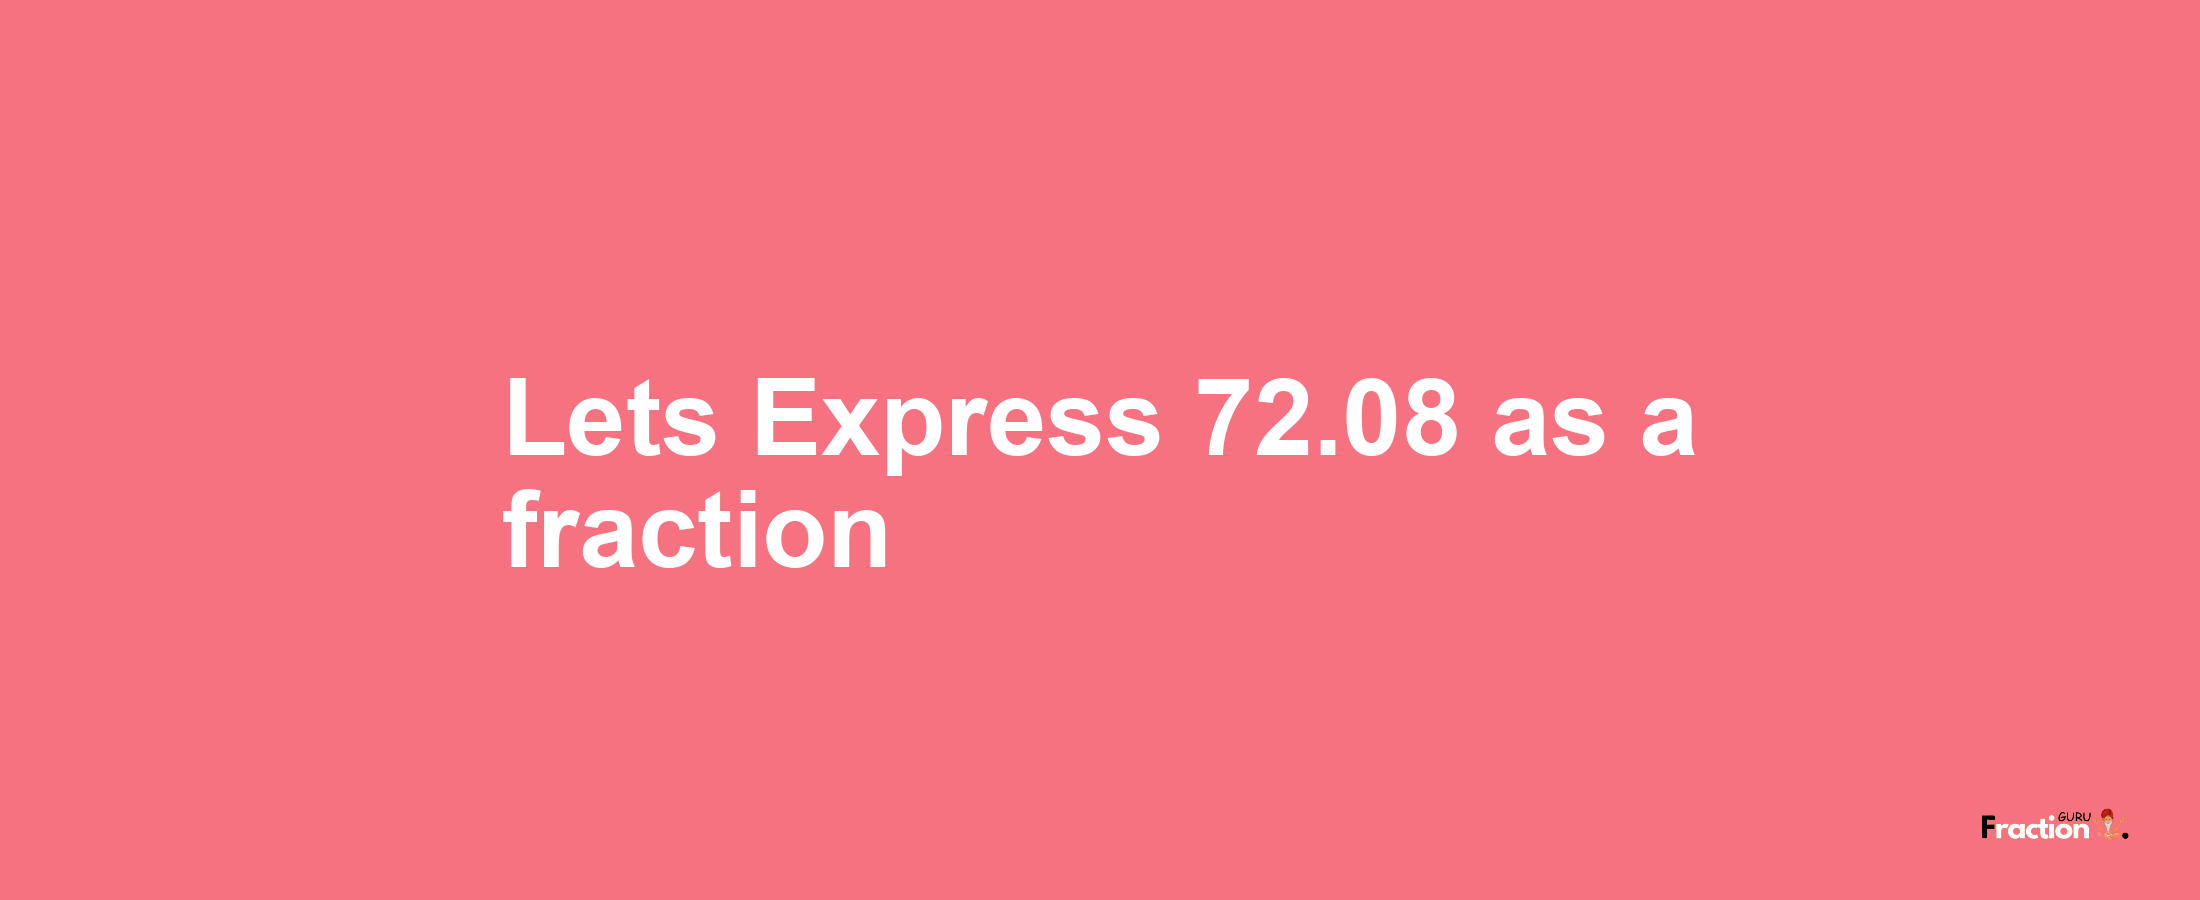 Lets Express 72.08 as afraction